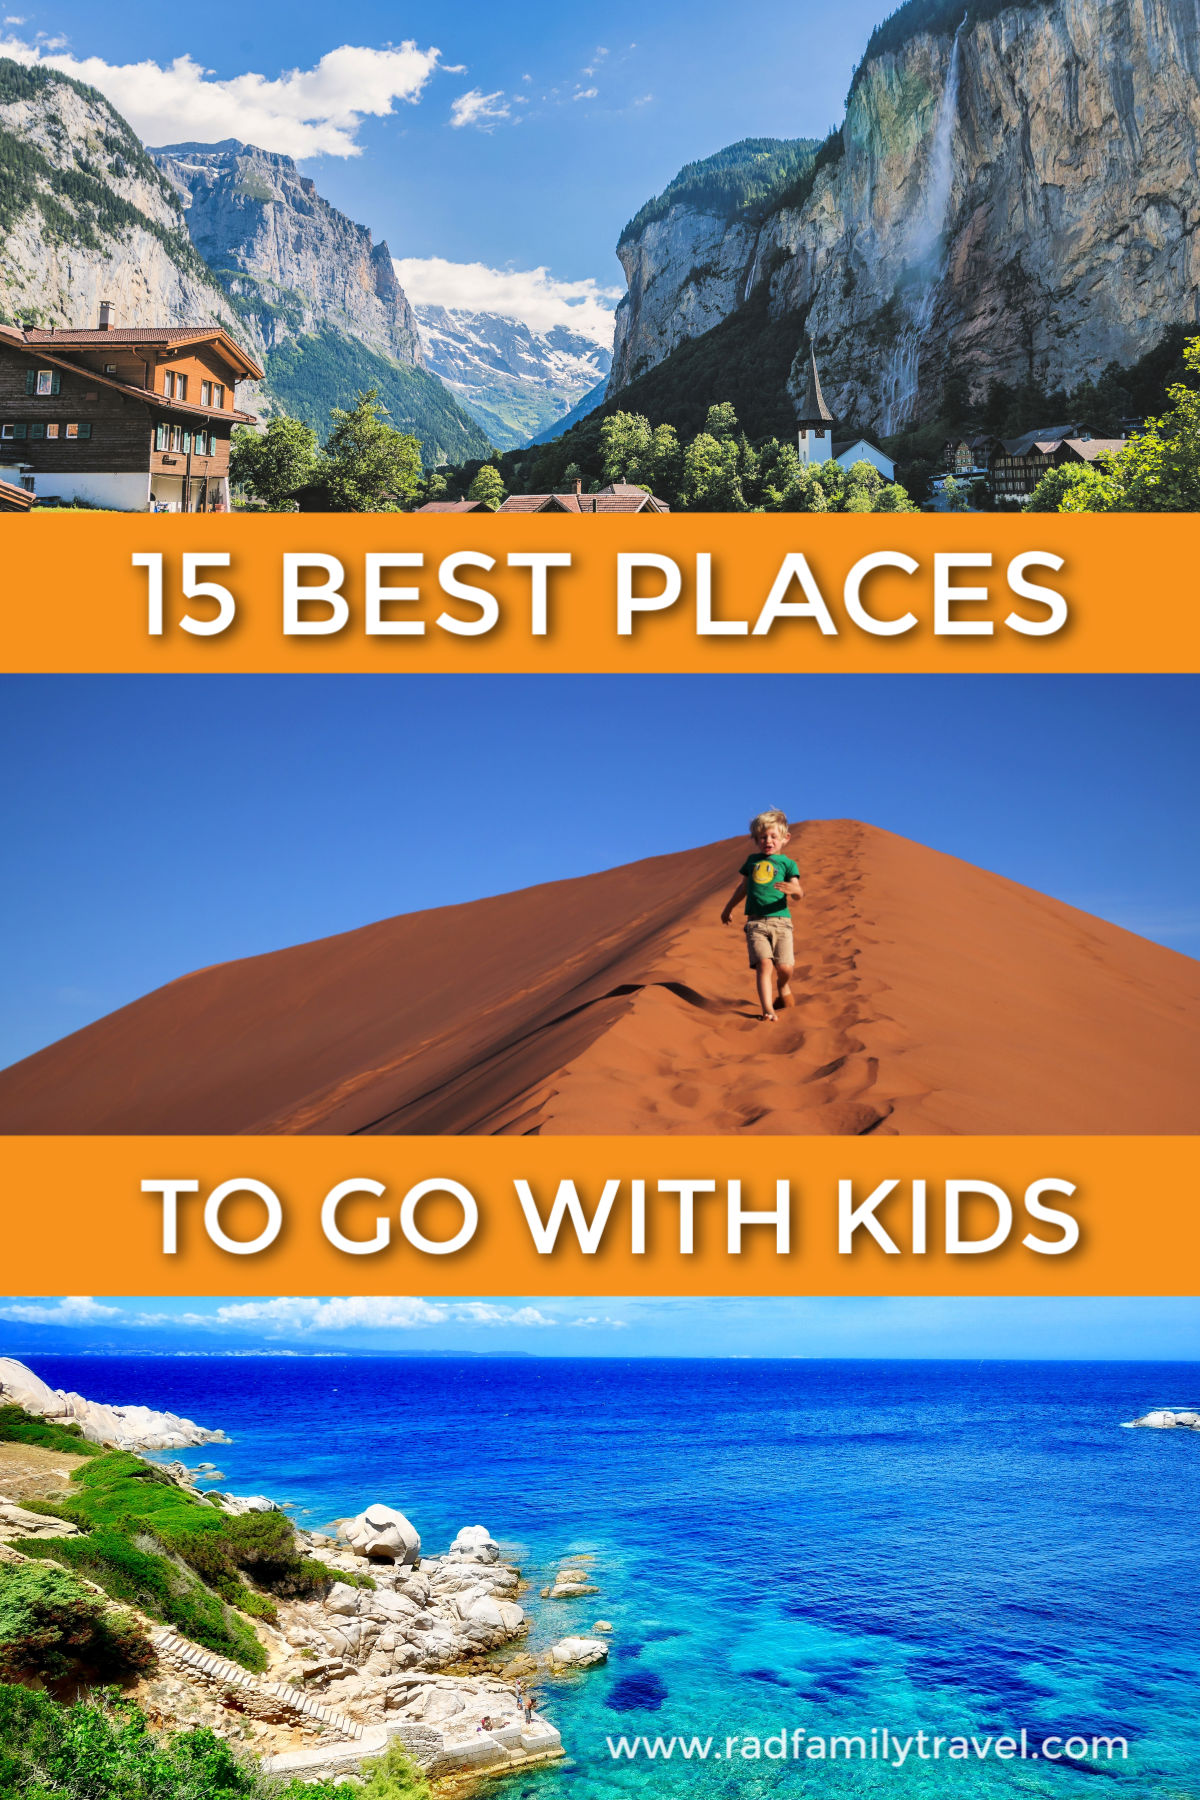 15 best places to go with kids